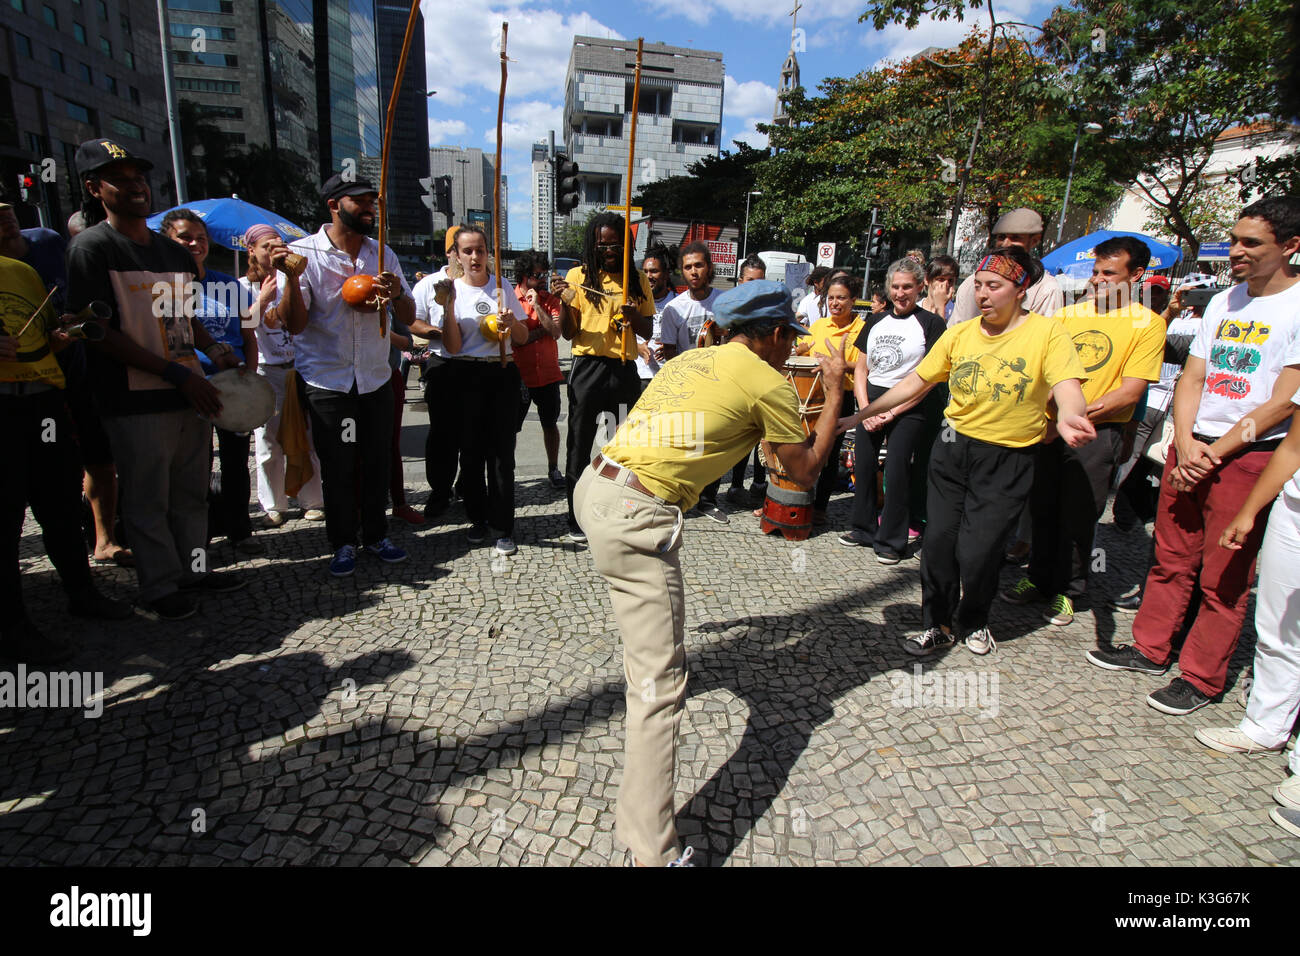 Rio de Janeiro, Brazil, September 02, 2017: Hundreds of collectors of antiques, artisans and artists exhibit their products in tents along Rua do Lavradio, one of the oldest streets in the center of Rio. people take advantage of the cultural program for shopping and also to enjoy the gastronomy of the restaurants of the region of Lapa, where the fair happens. Capoeira, Brazilian cultural expression developed by descendants of African slaves. Credit: Luiz Souza/Alamy Live News Stock Photo